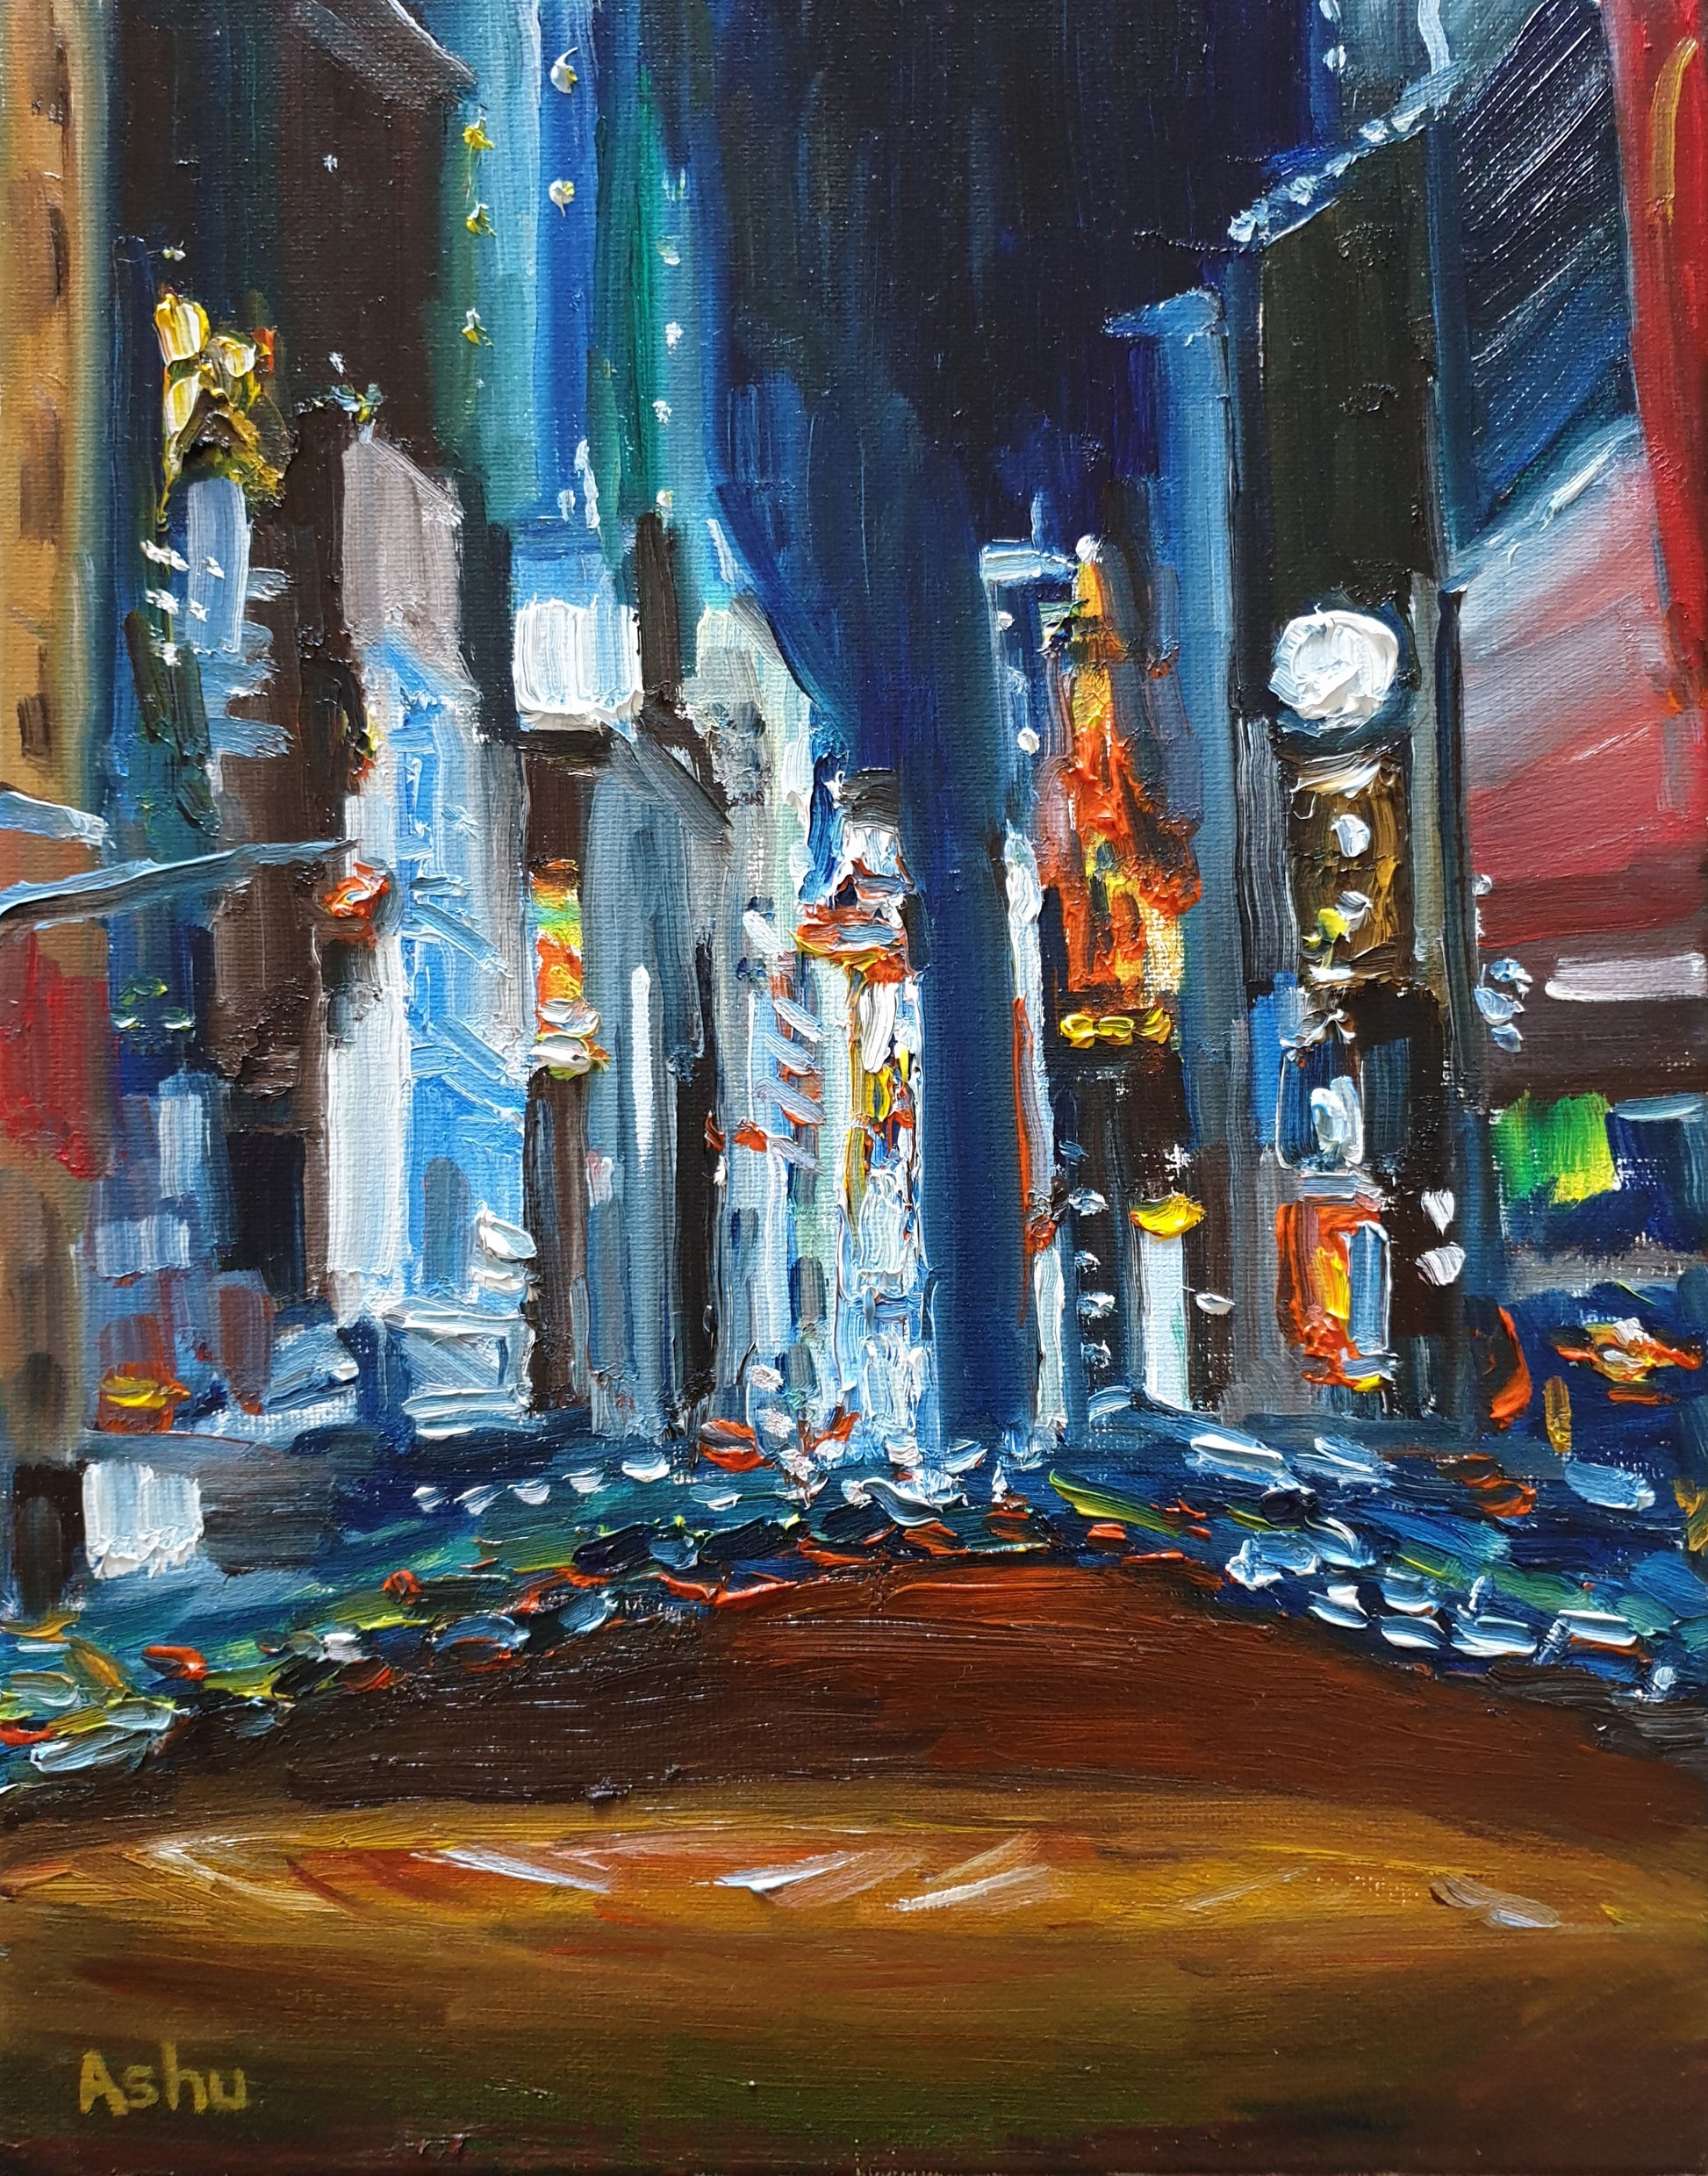 #Midnight Ride in Times Square - Ashu's Art